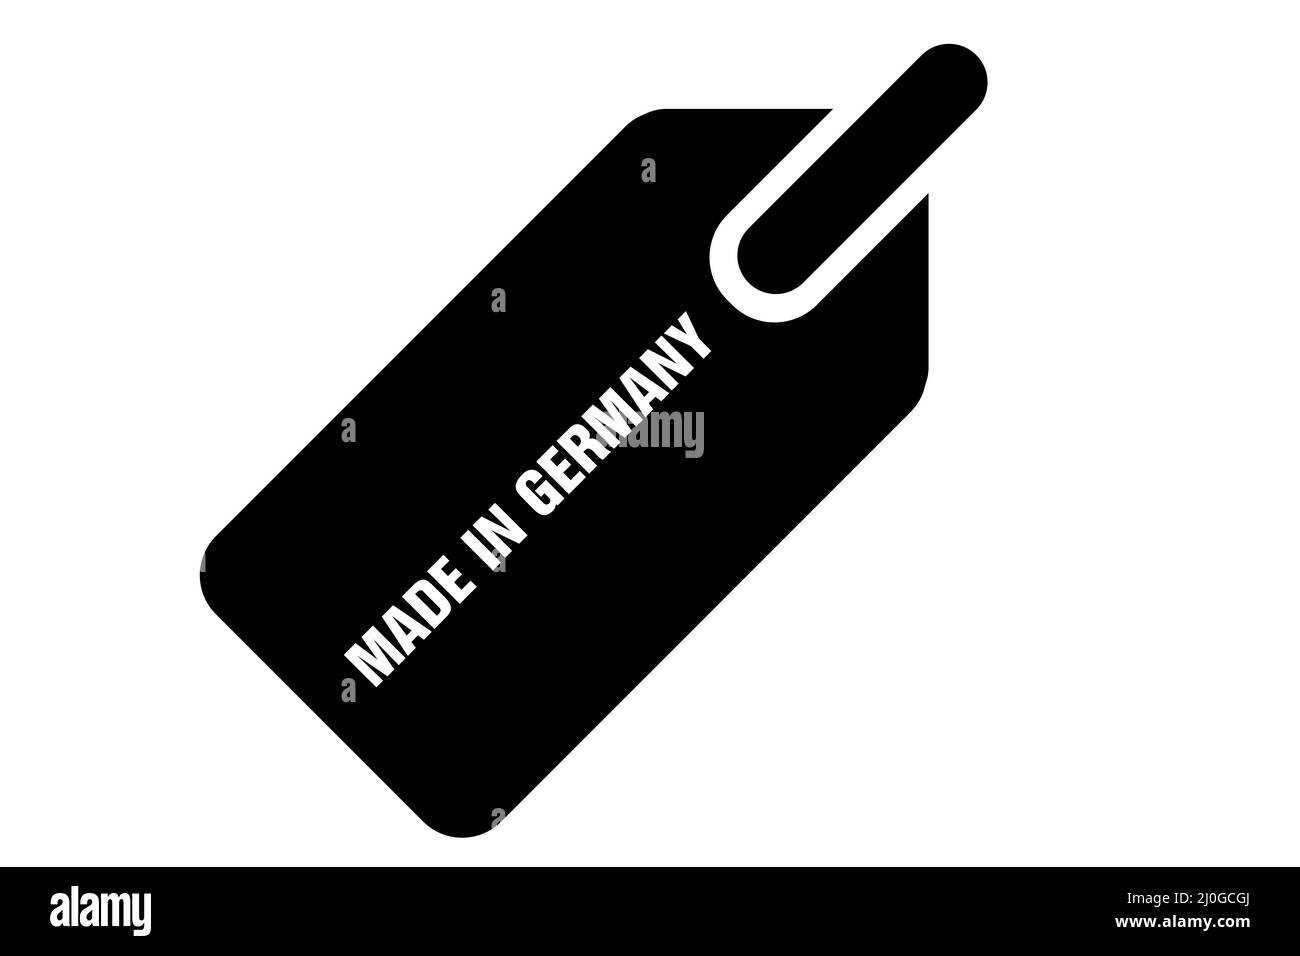 Illustration of a price tag with 'Made in Germany' text Stock Photo